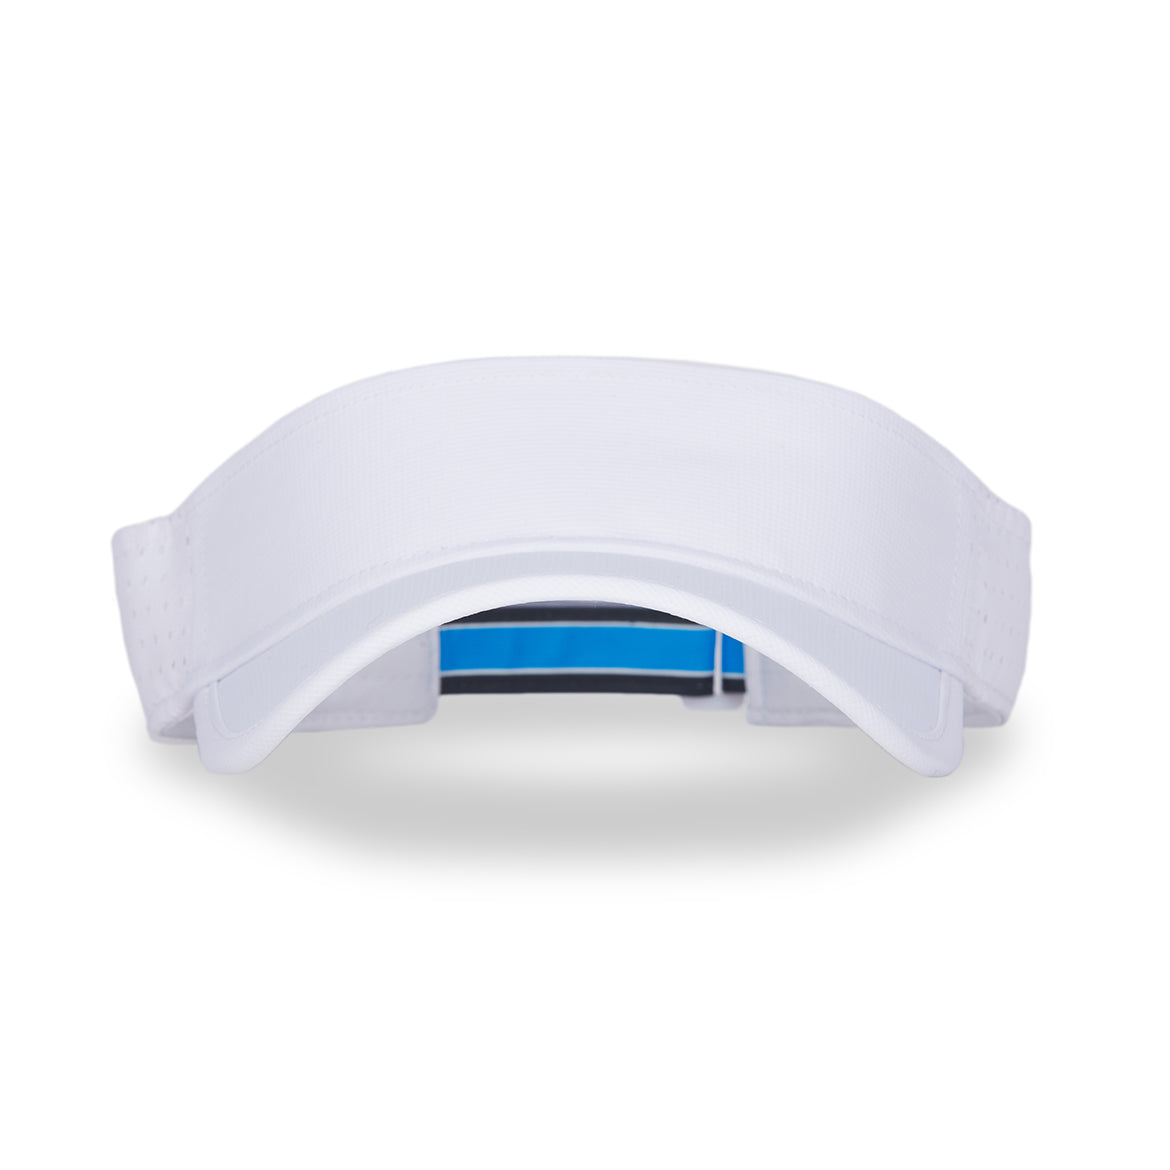 Front view of white visor with blue and navy striped adjustable strap on the back.